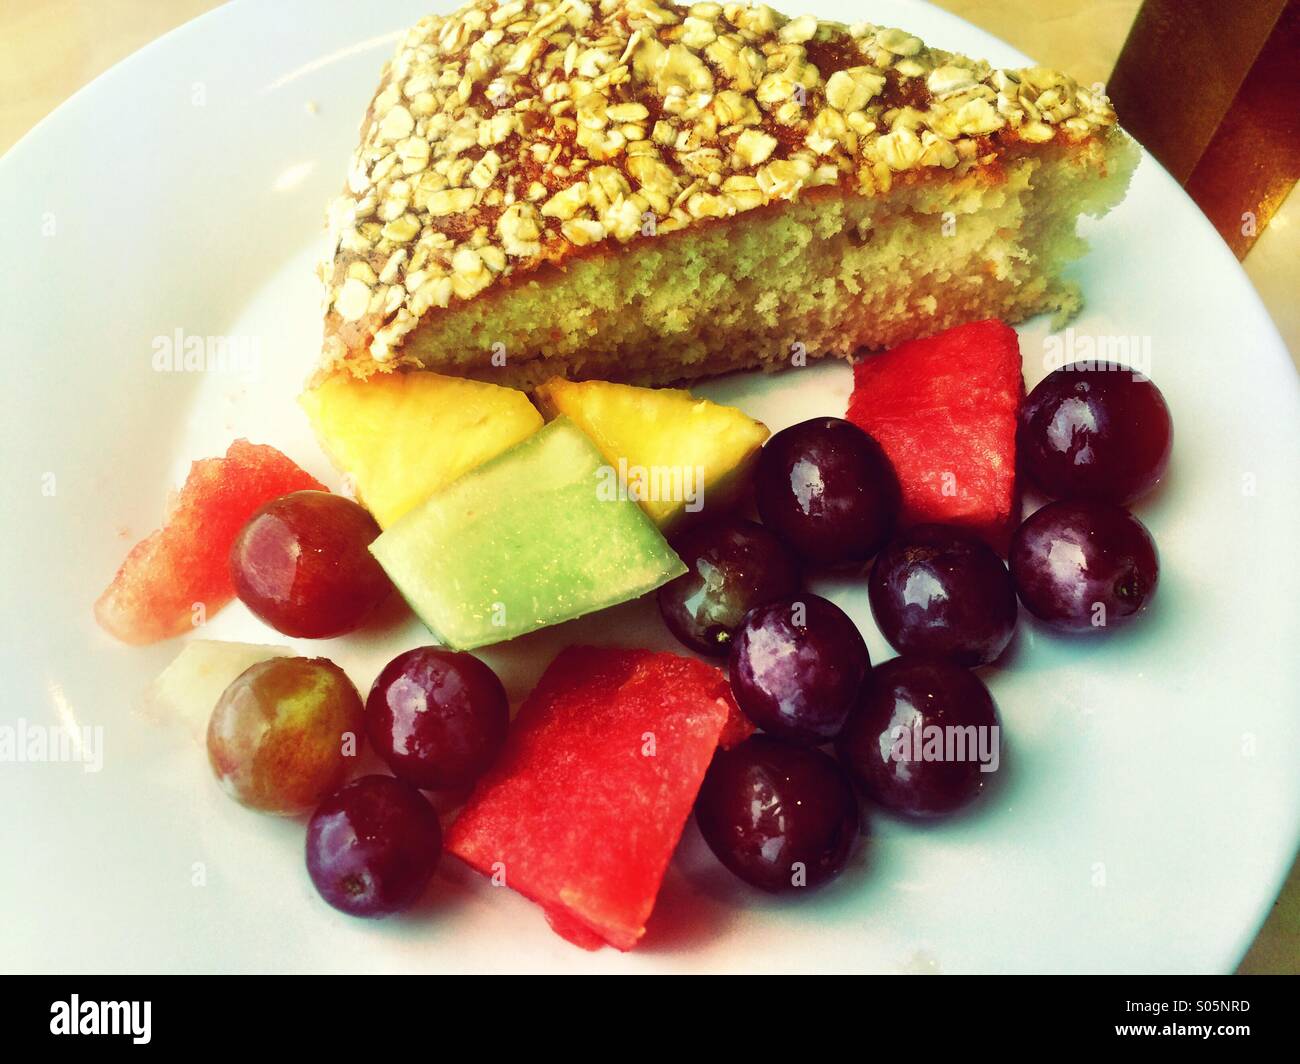 Slice of cake and fresh fruit pieces on plate. Stock Photo